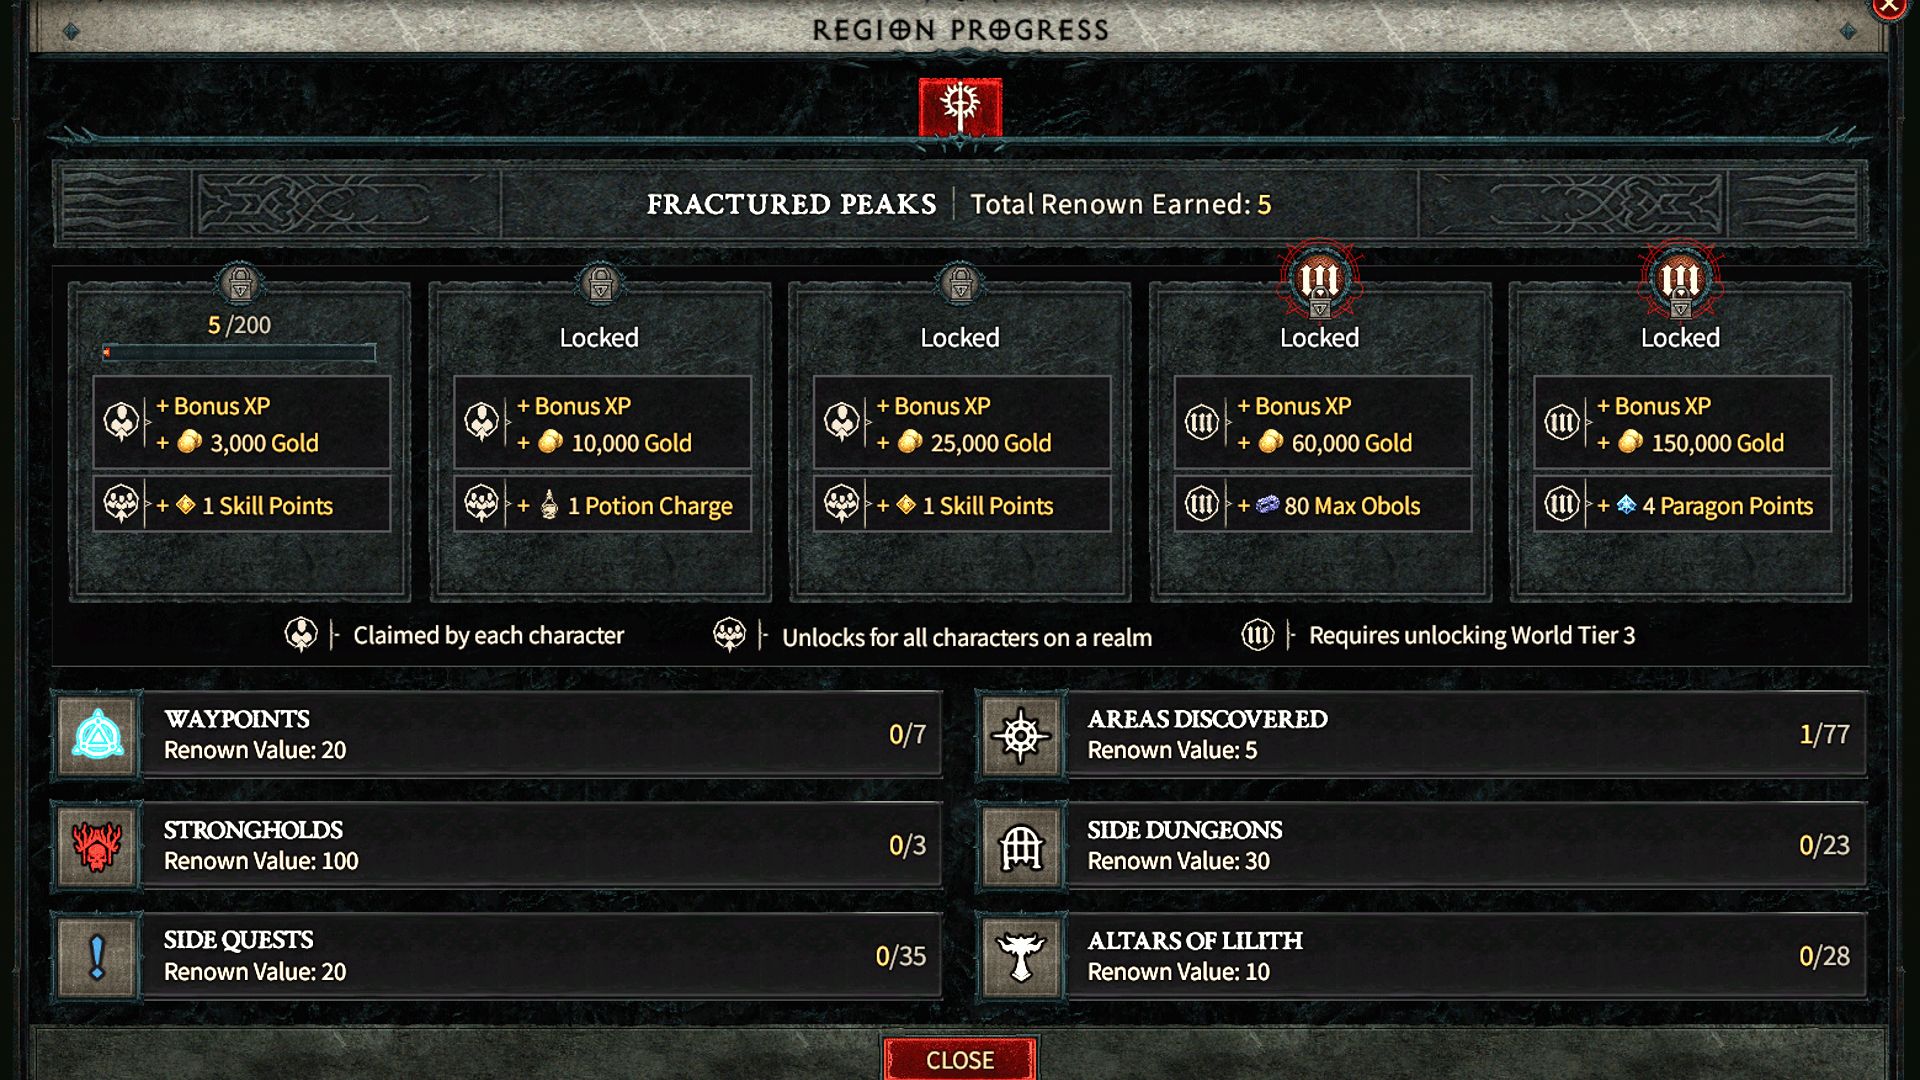 The Region Progress menu which provides a full breakdown of Diablo 4 Renown in the Fractured Peaks region and the rewards, including the waypoints, strongholds, and dungeons to be completed.